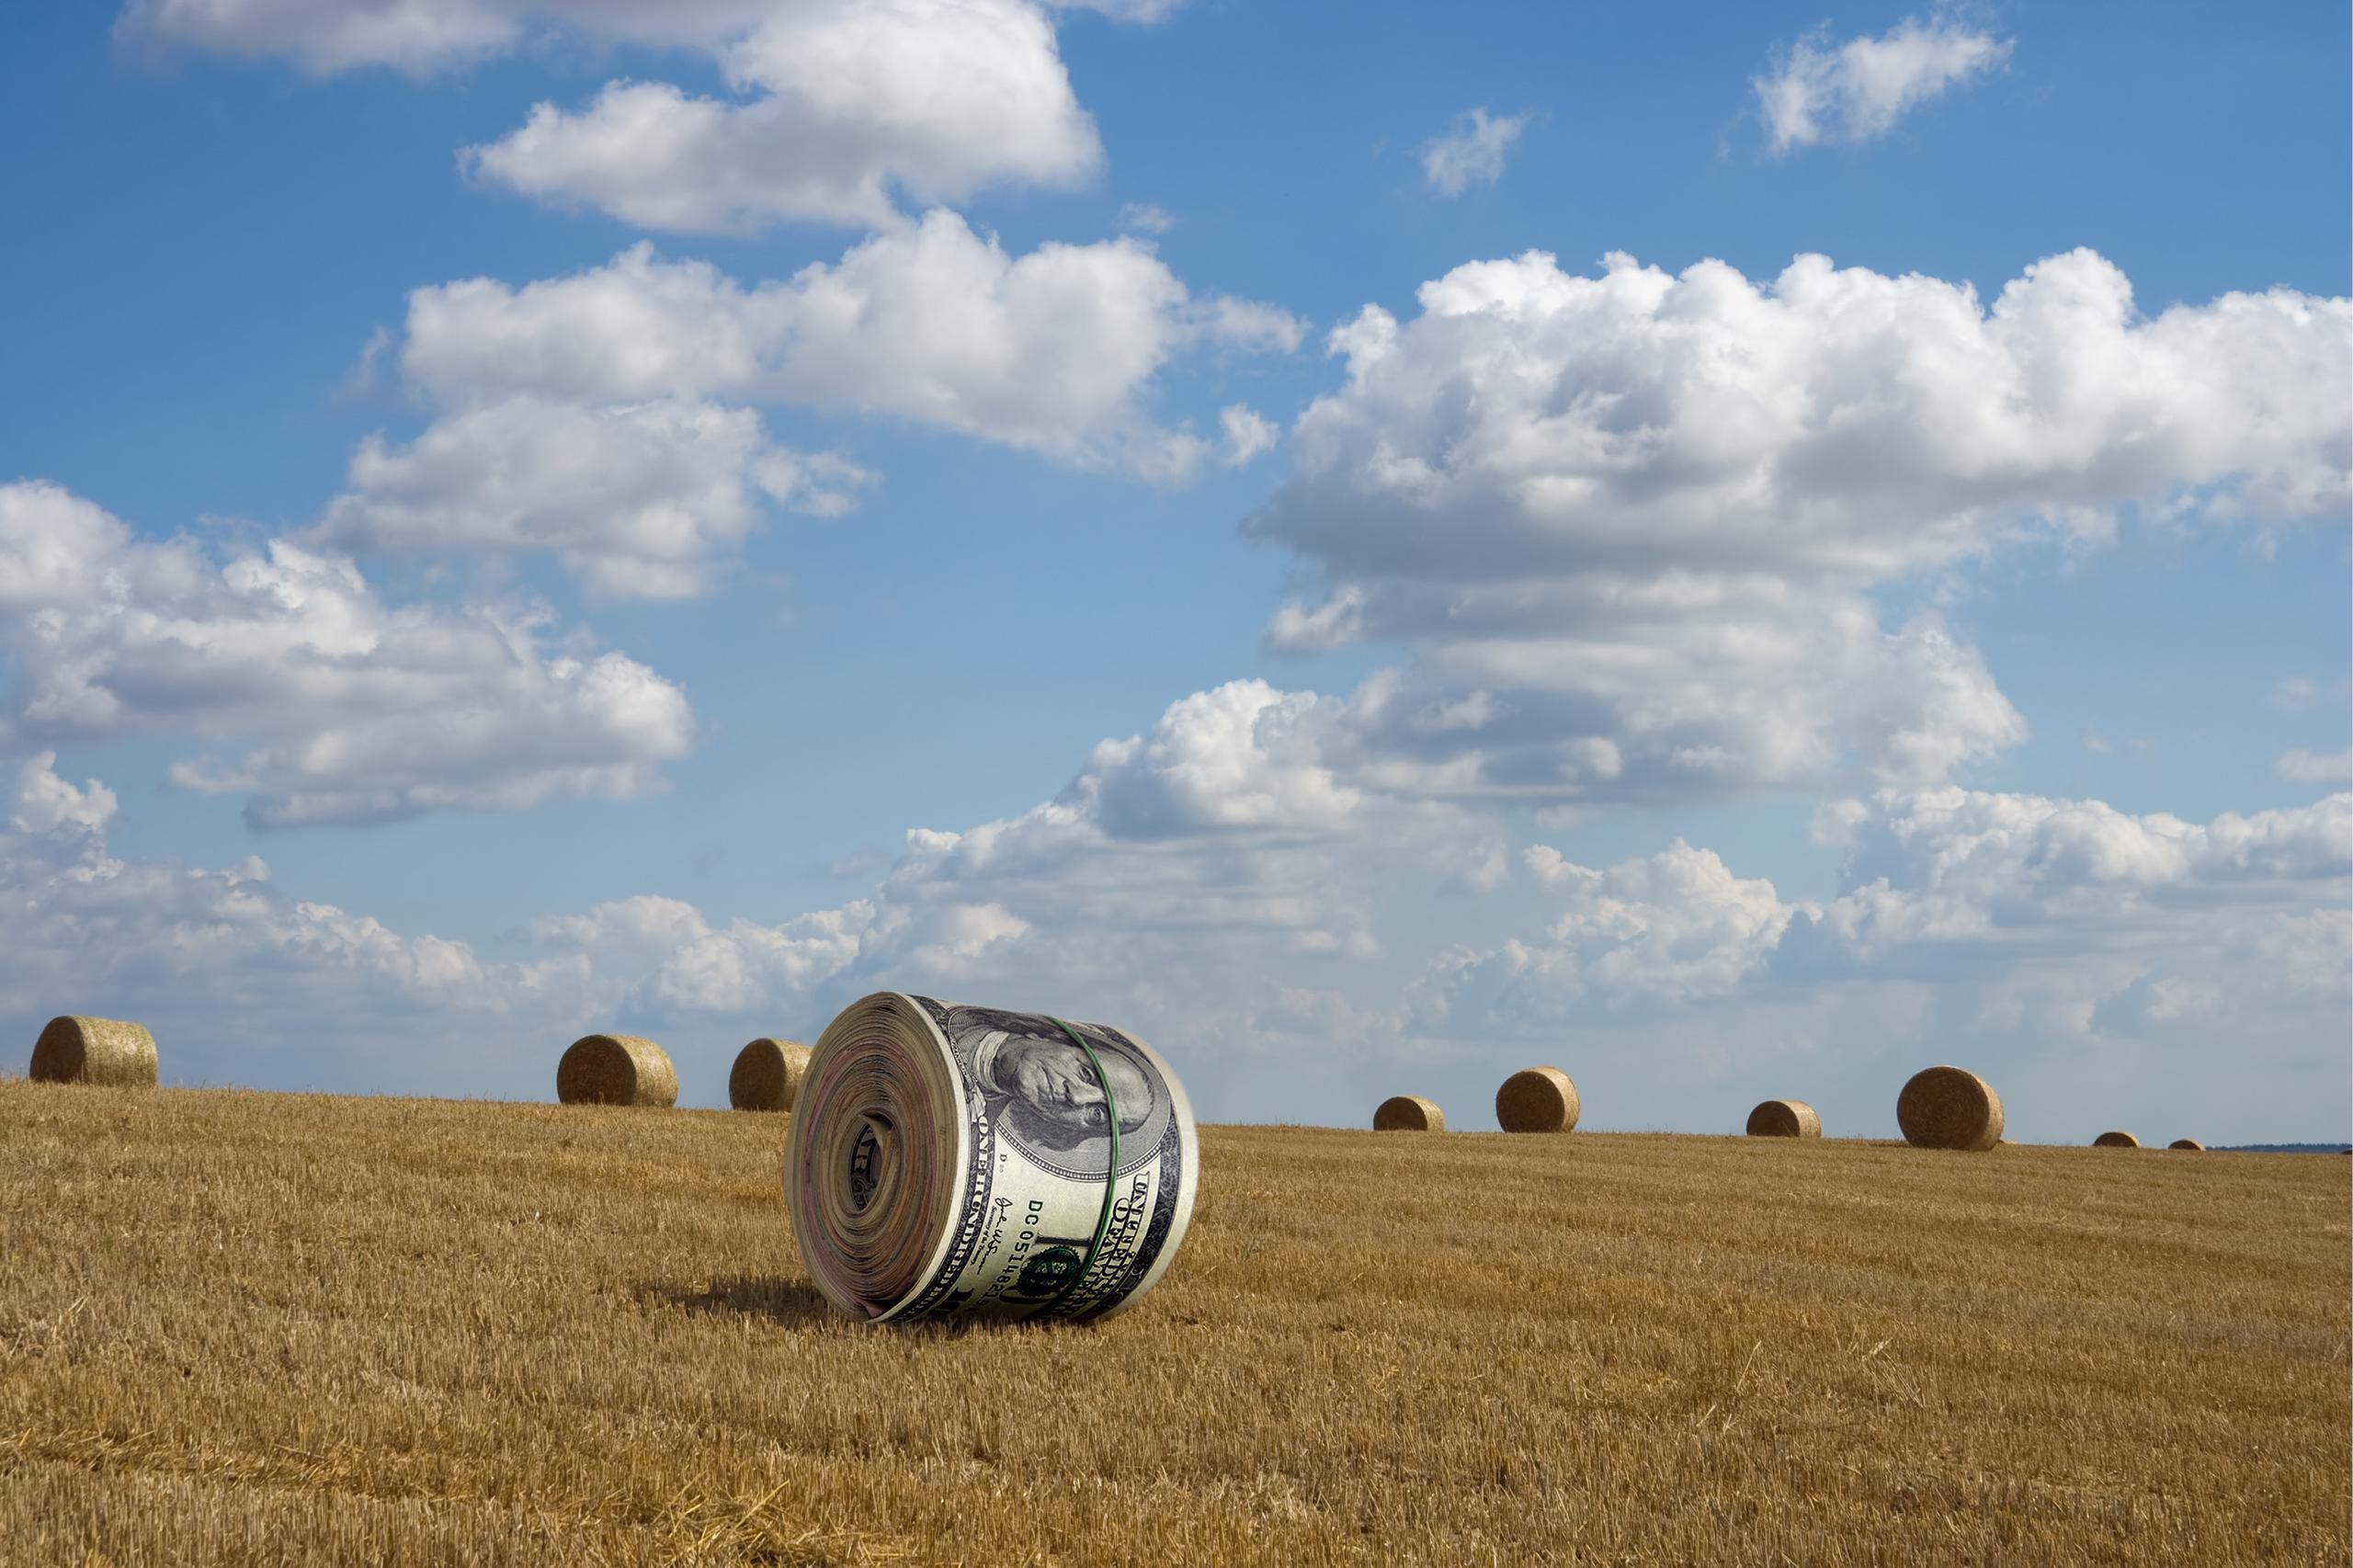 Haybales that look like rolls of money